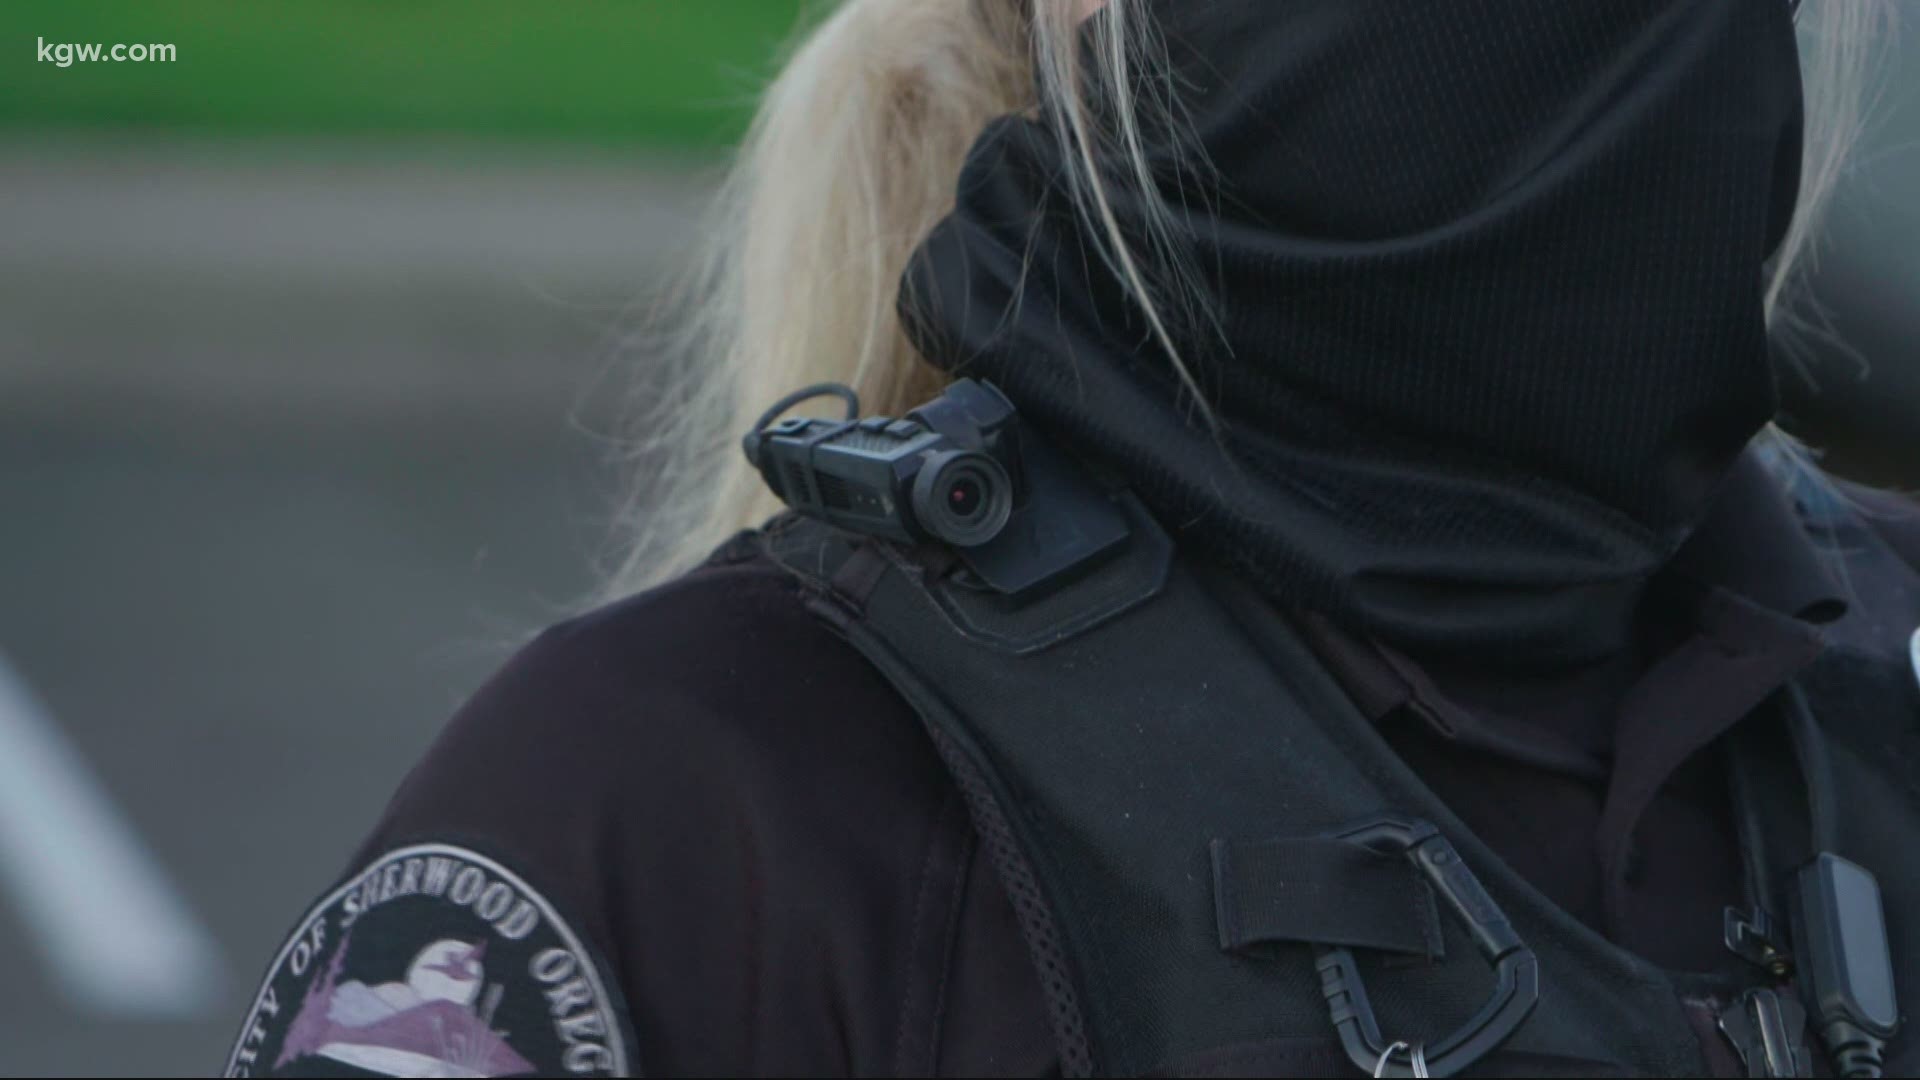 City commissioners were asked to share opinions after a KGW investigation found Portland was the only big-city police department that doesn’t use body-worn cameras.